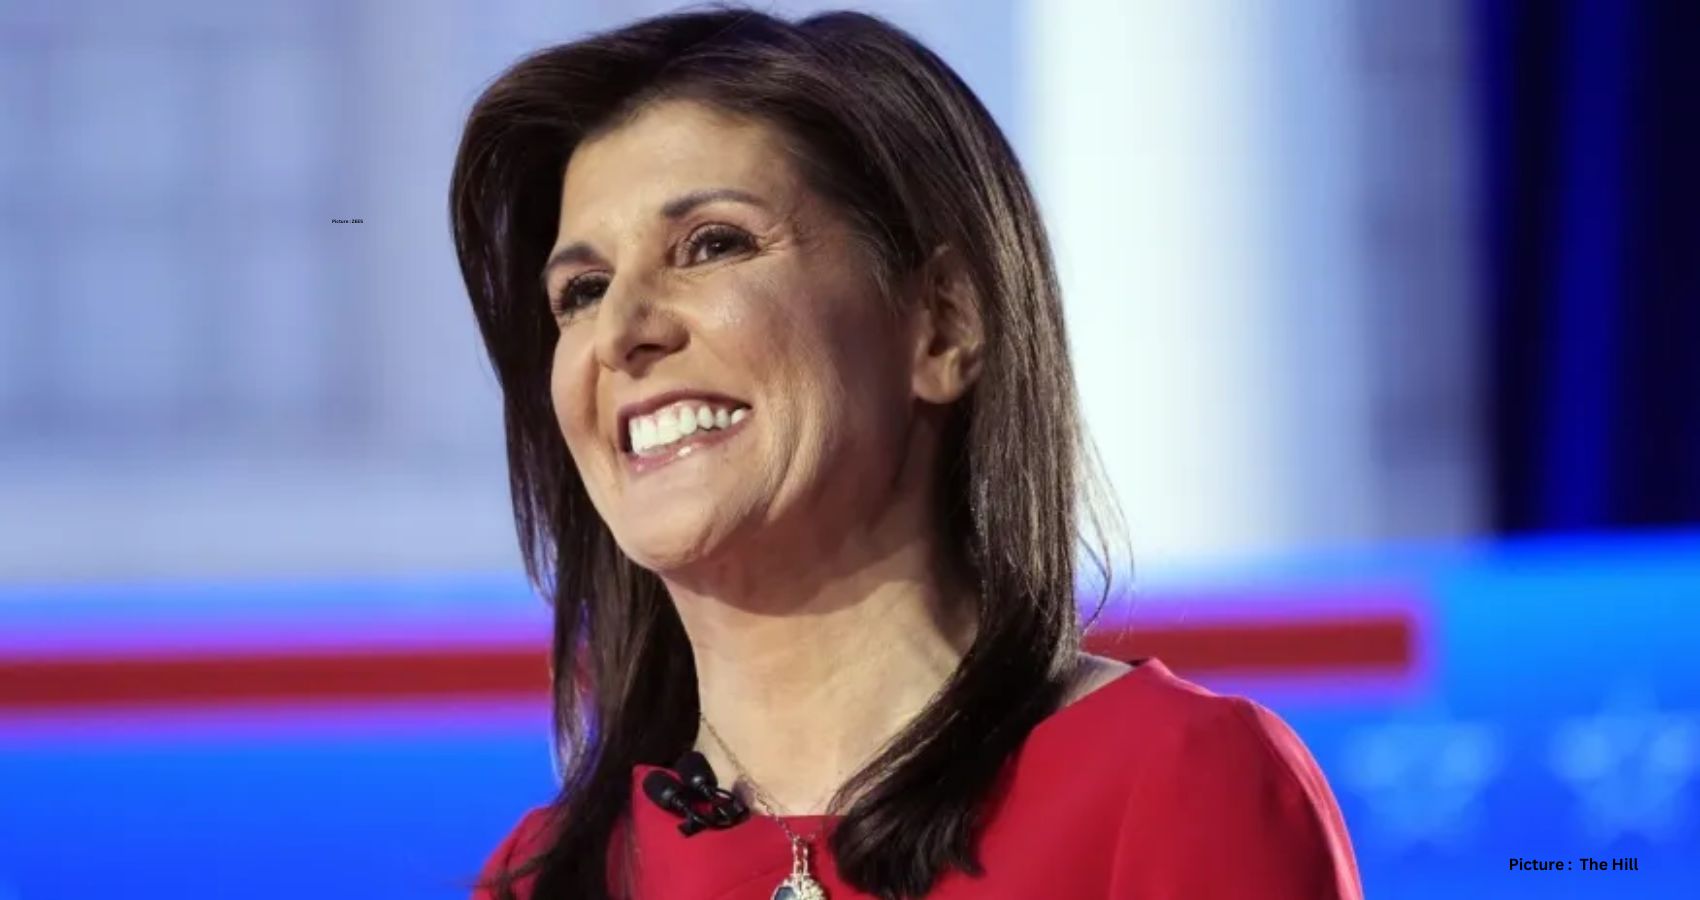 Nikki Haley Seeks to Surpass Expectations in Iowa Caucuses, Emerging as Top Contender Against Trump in Republican Primary